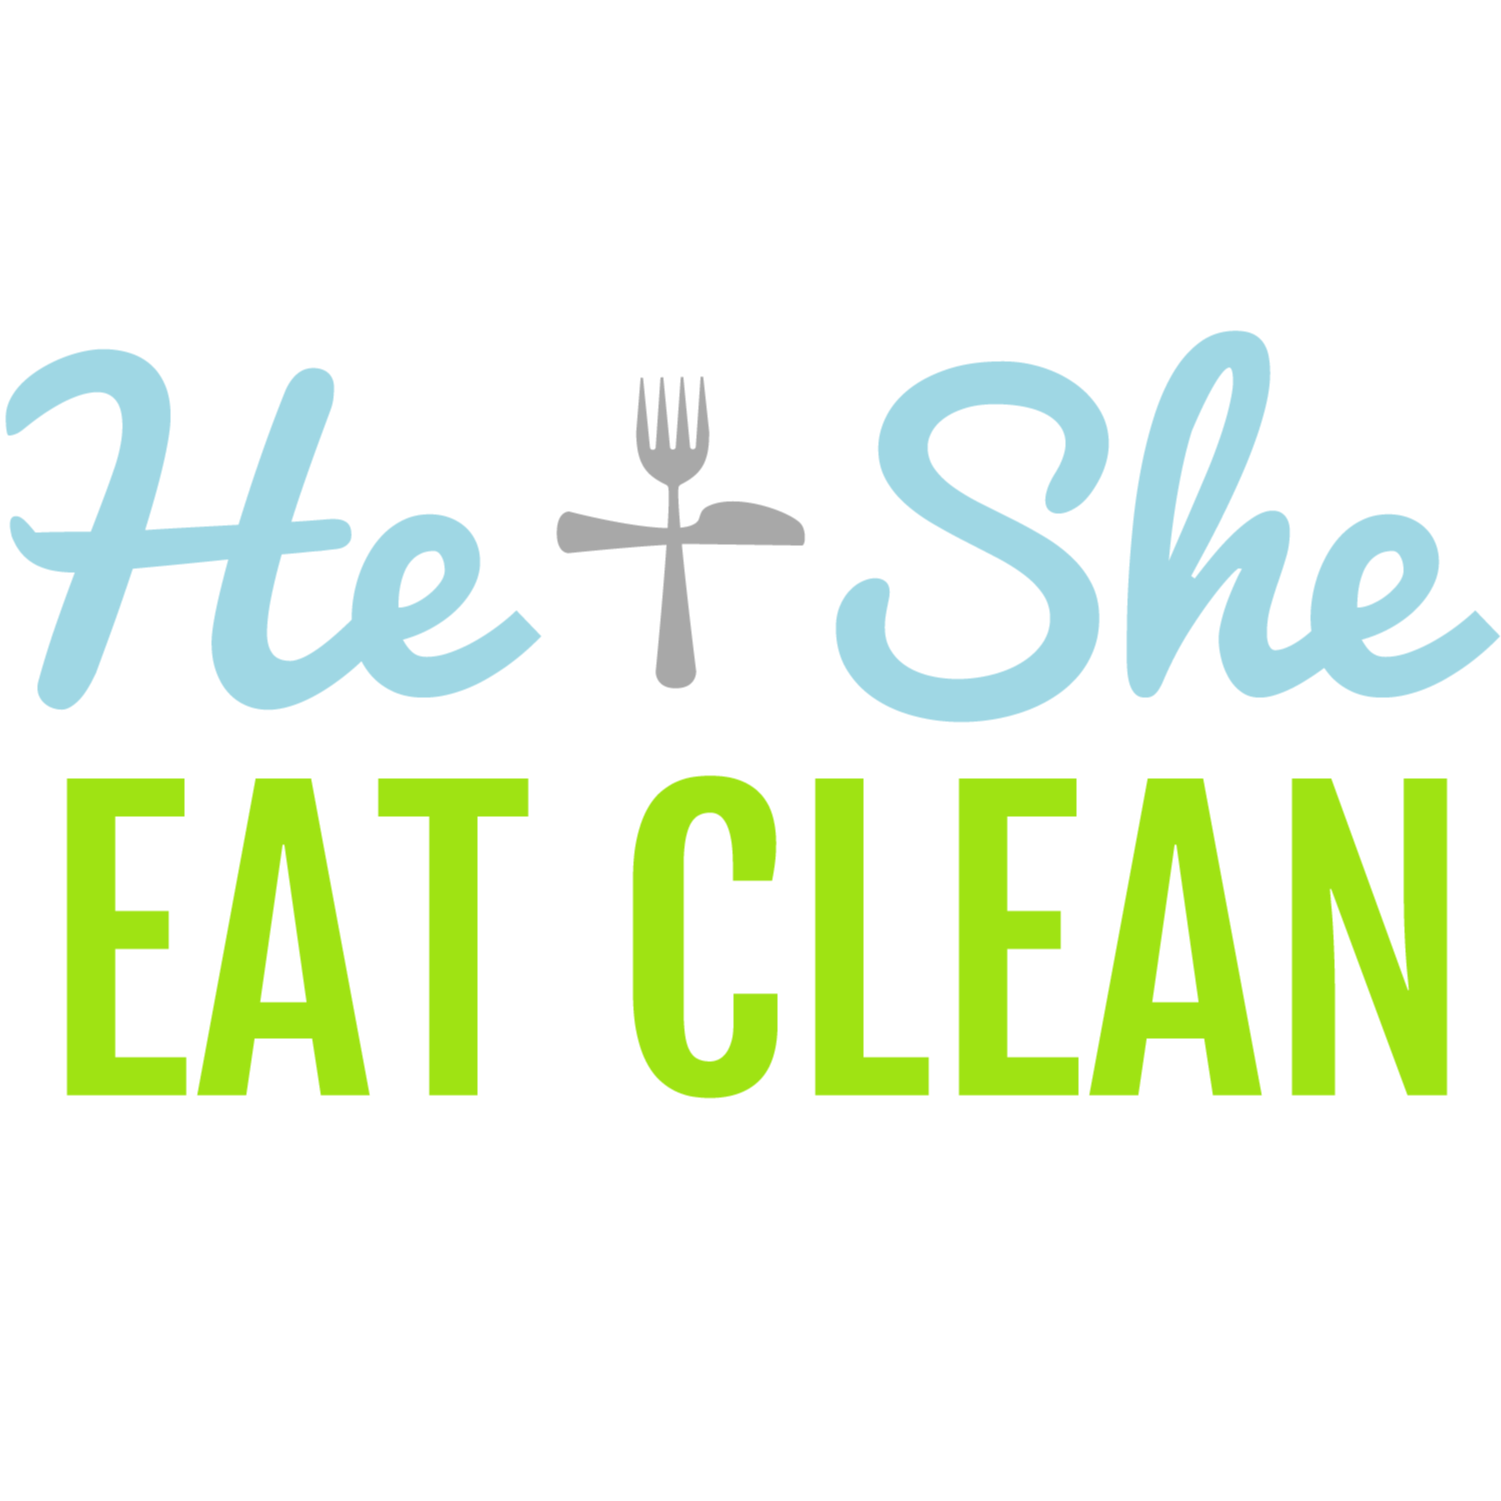 He and She Eat Clean - Google+